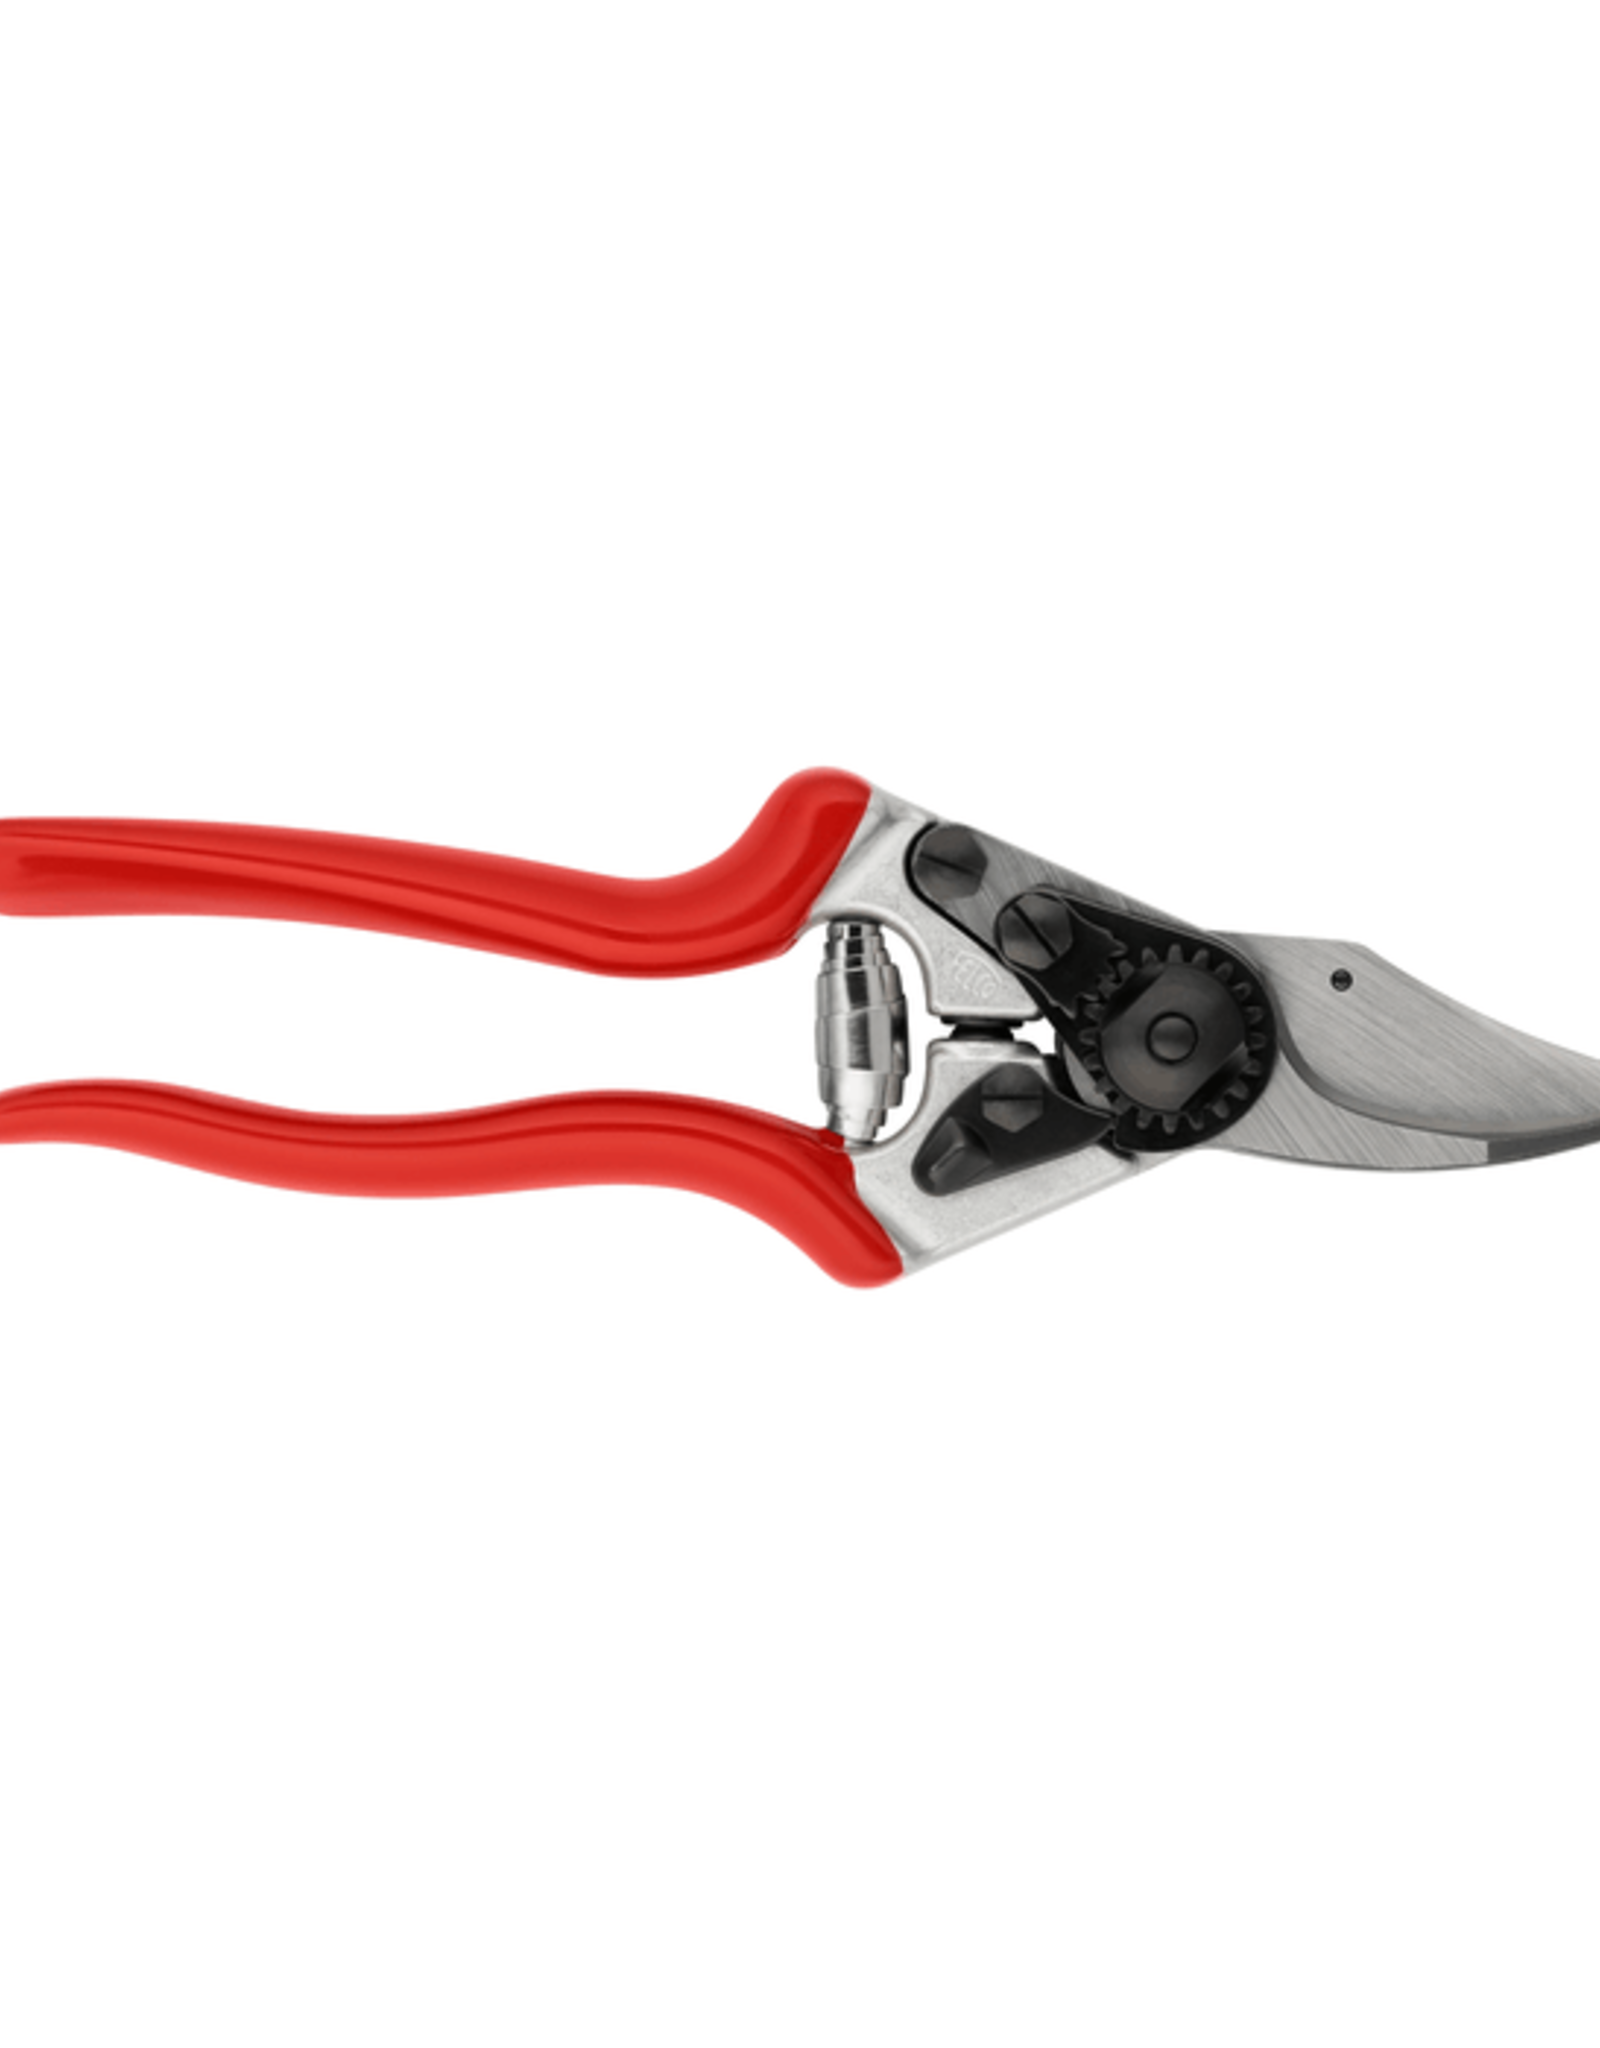 Felco 16 - One-hand pruning shear - High performance - Ergonomic - Compact - For left-handers